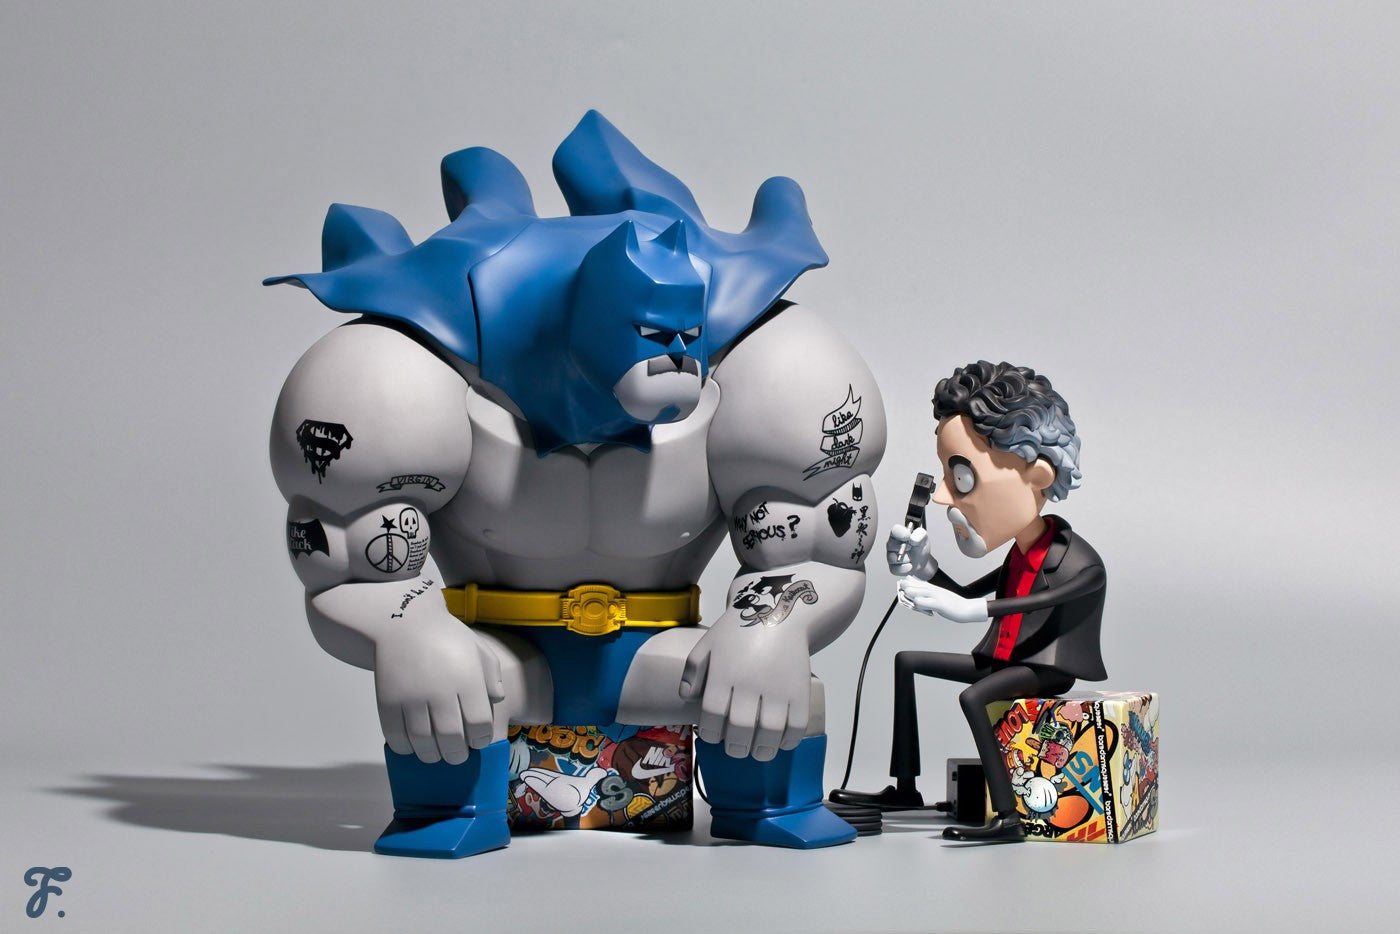 Toy figurine of superhero sitting on box with microphone, gorilla statue, cartoon character with power cord, and logo close-up.